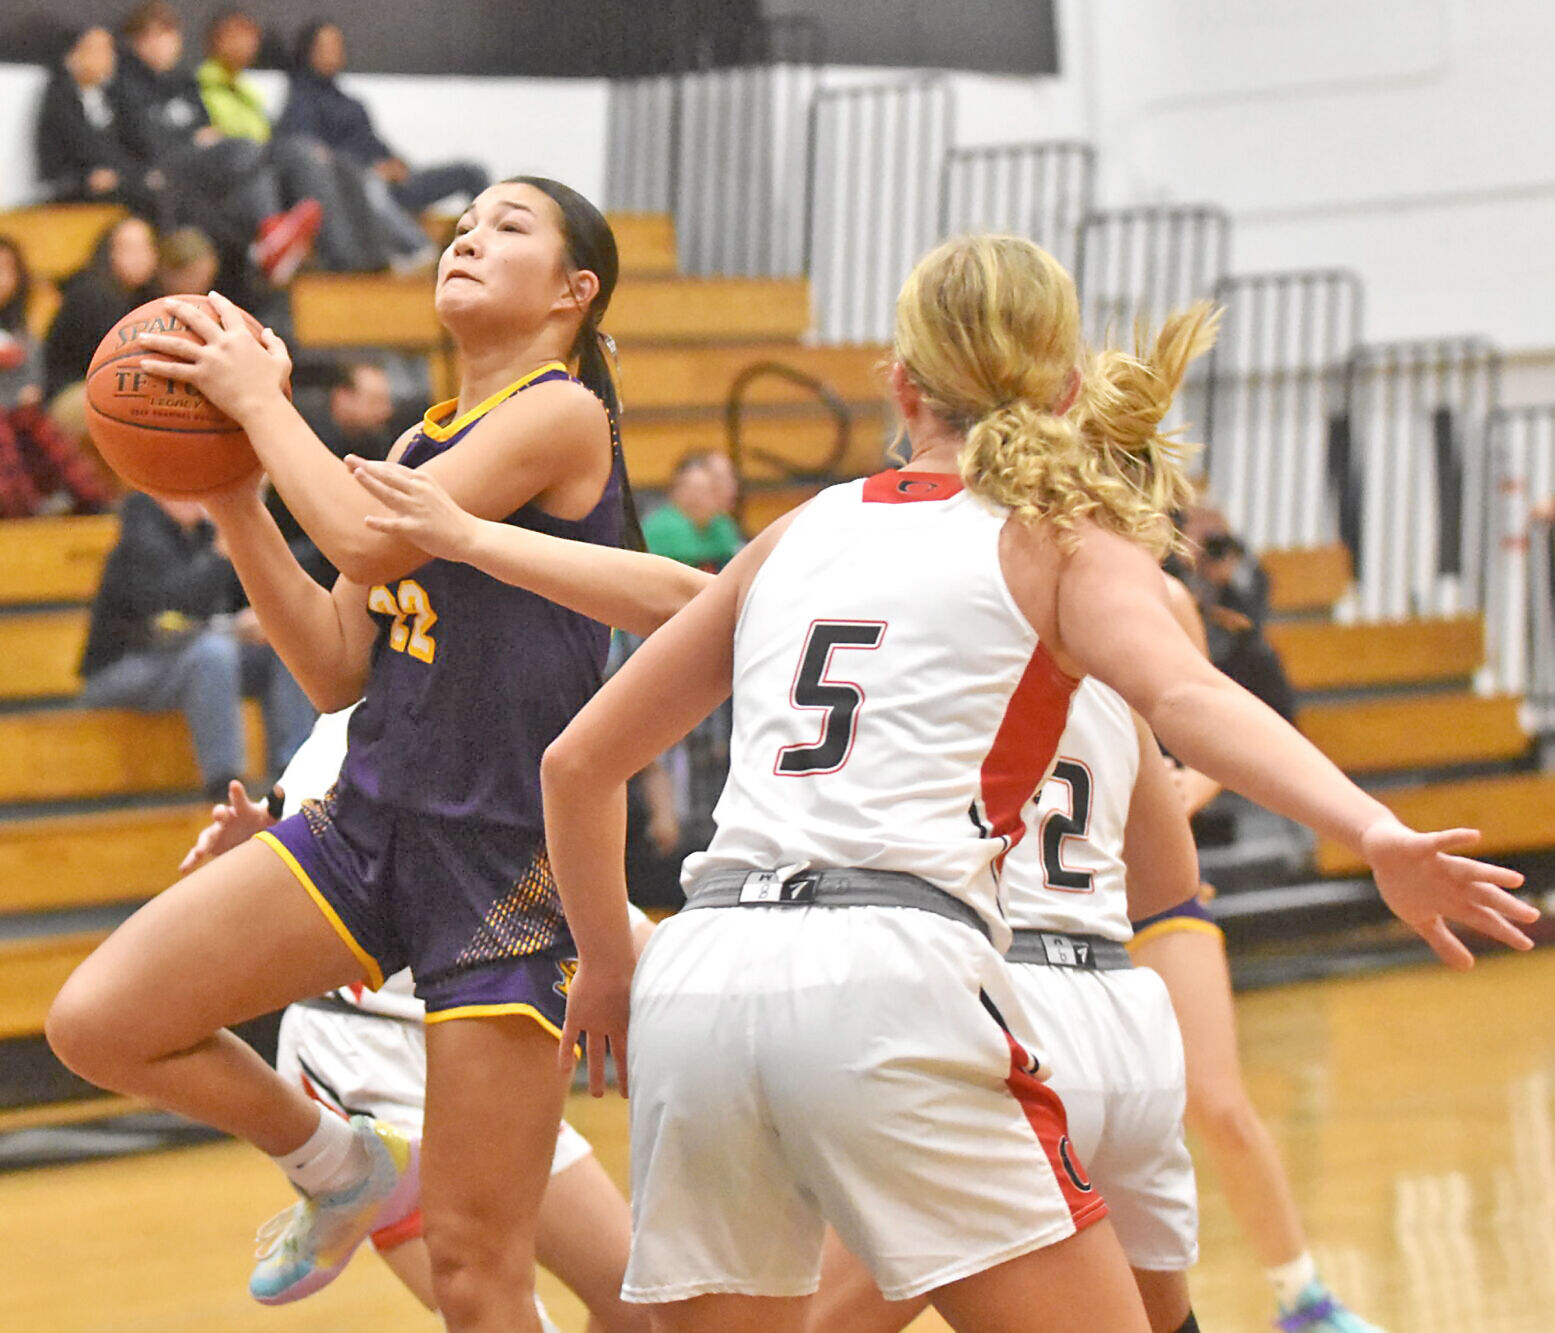 Sabers down River Queens 65-22 in local clash | High School Sports